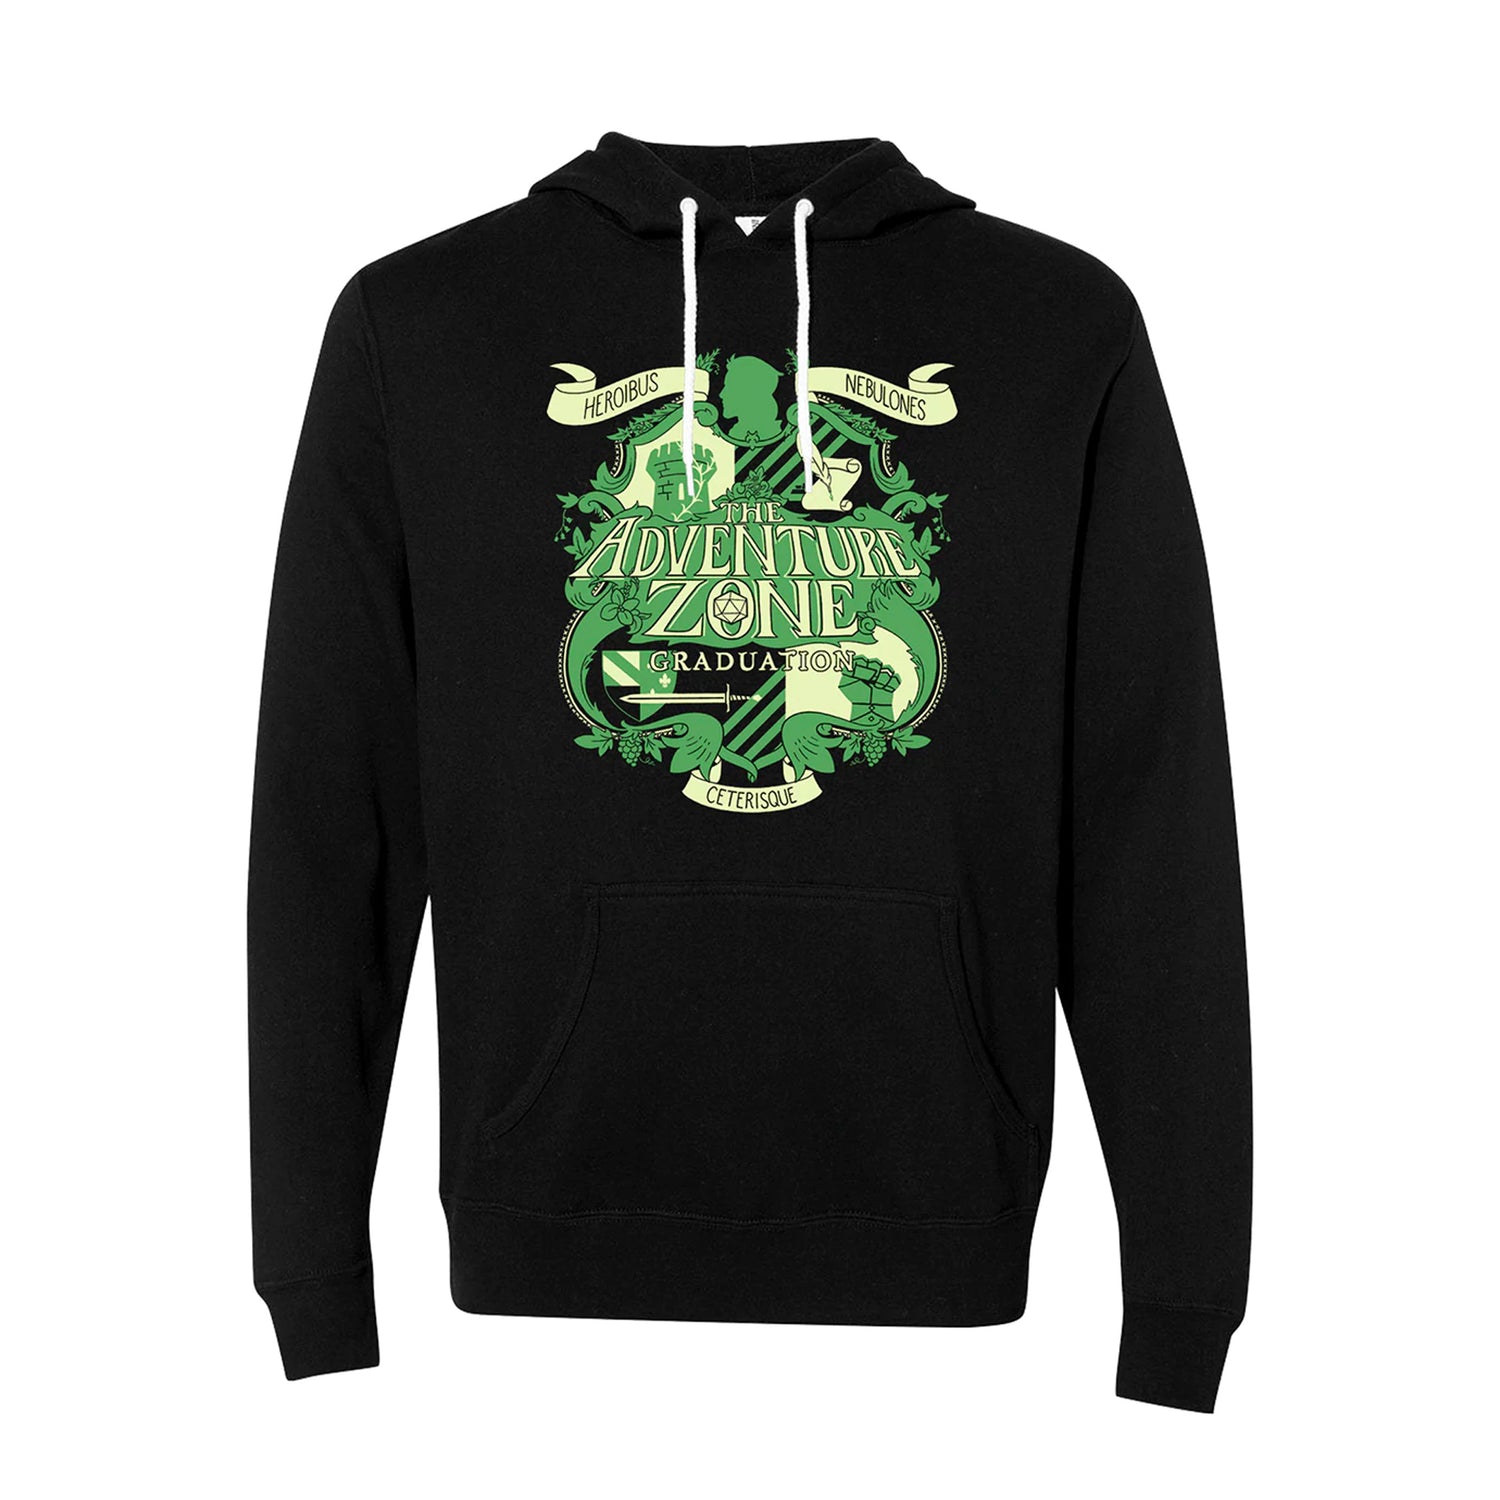 A black hoodie with white strings. On the front is the shield emblem for TAZ: Graduation in green and light green.